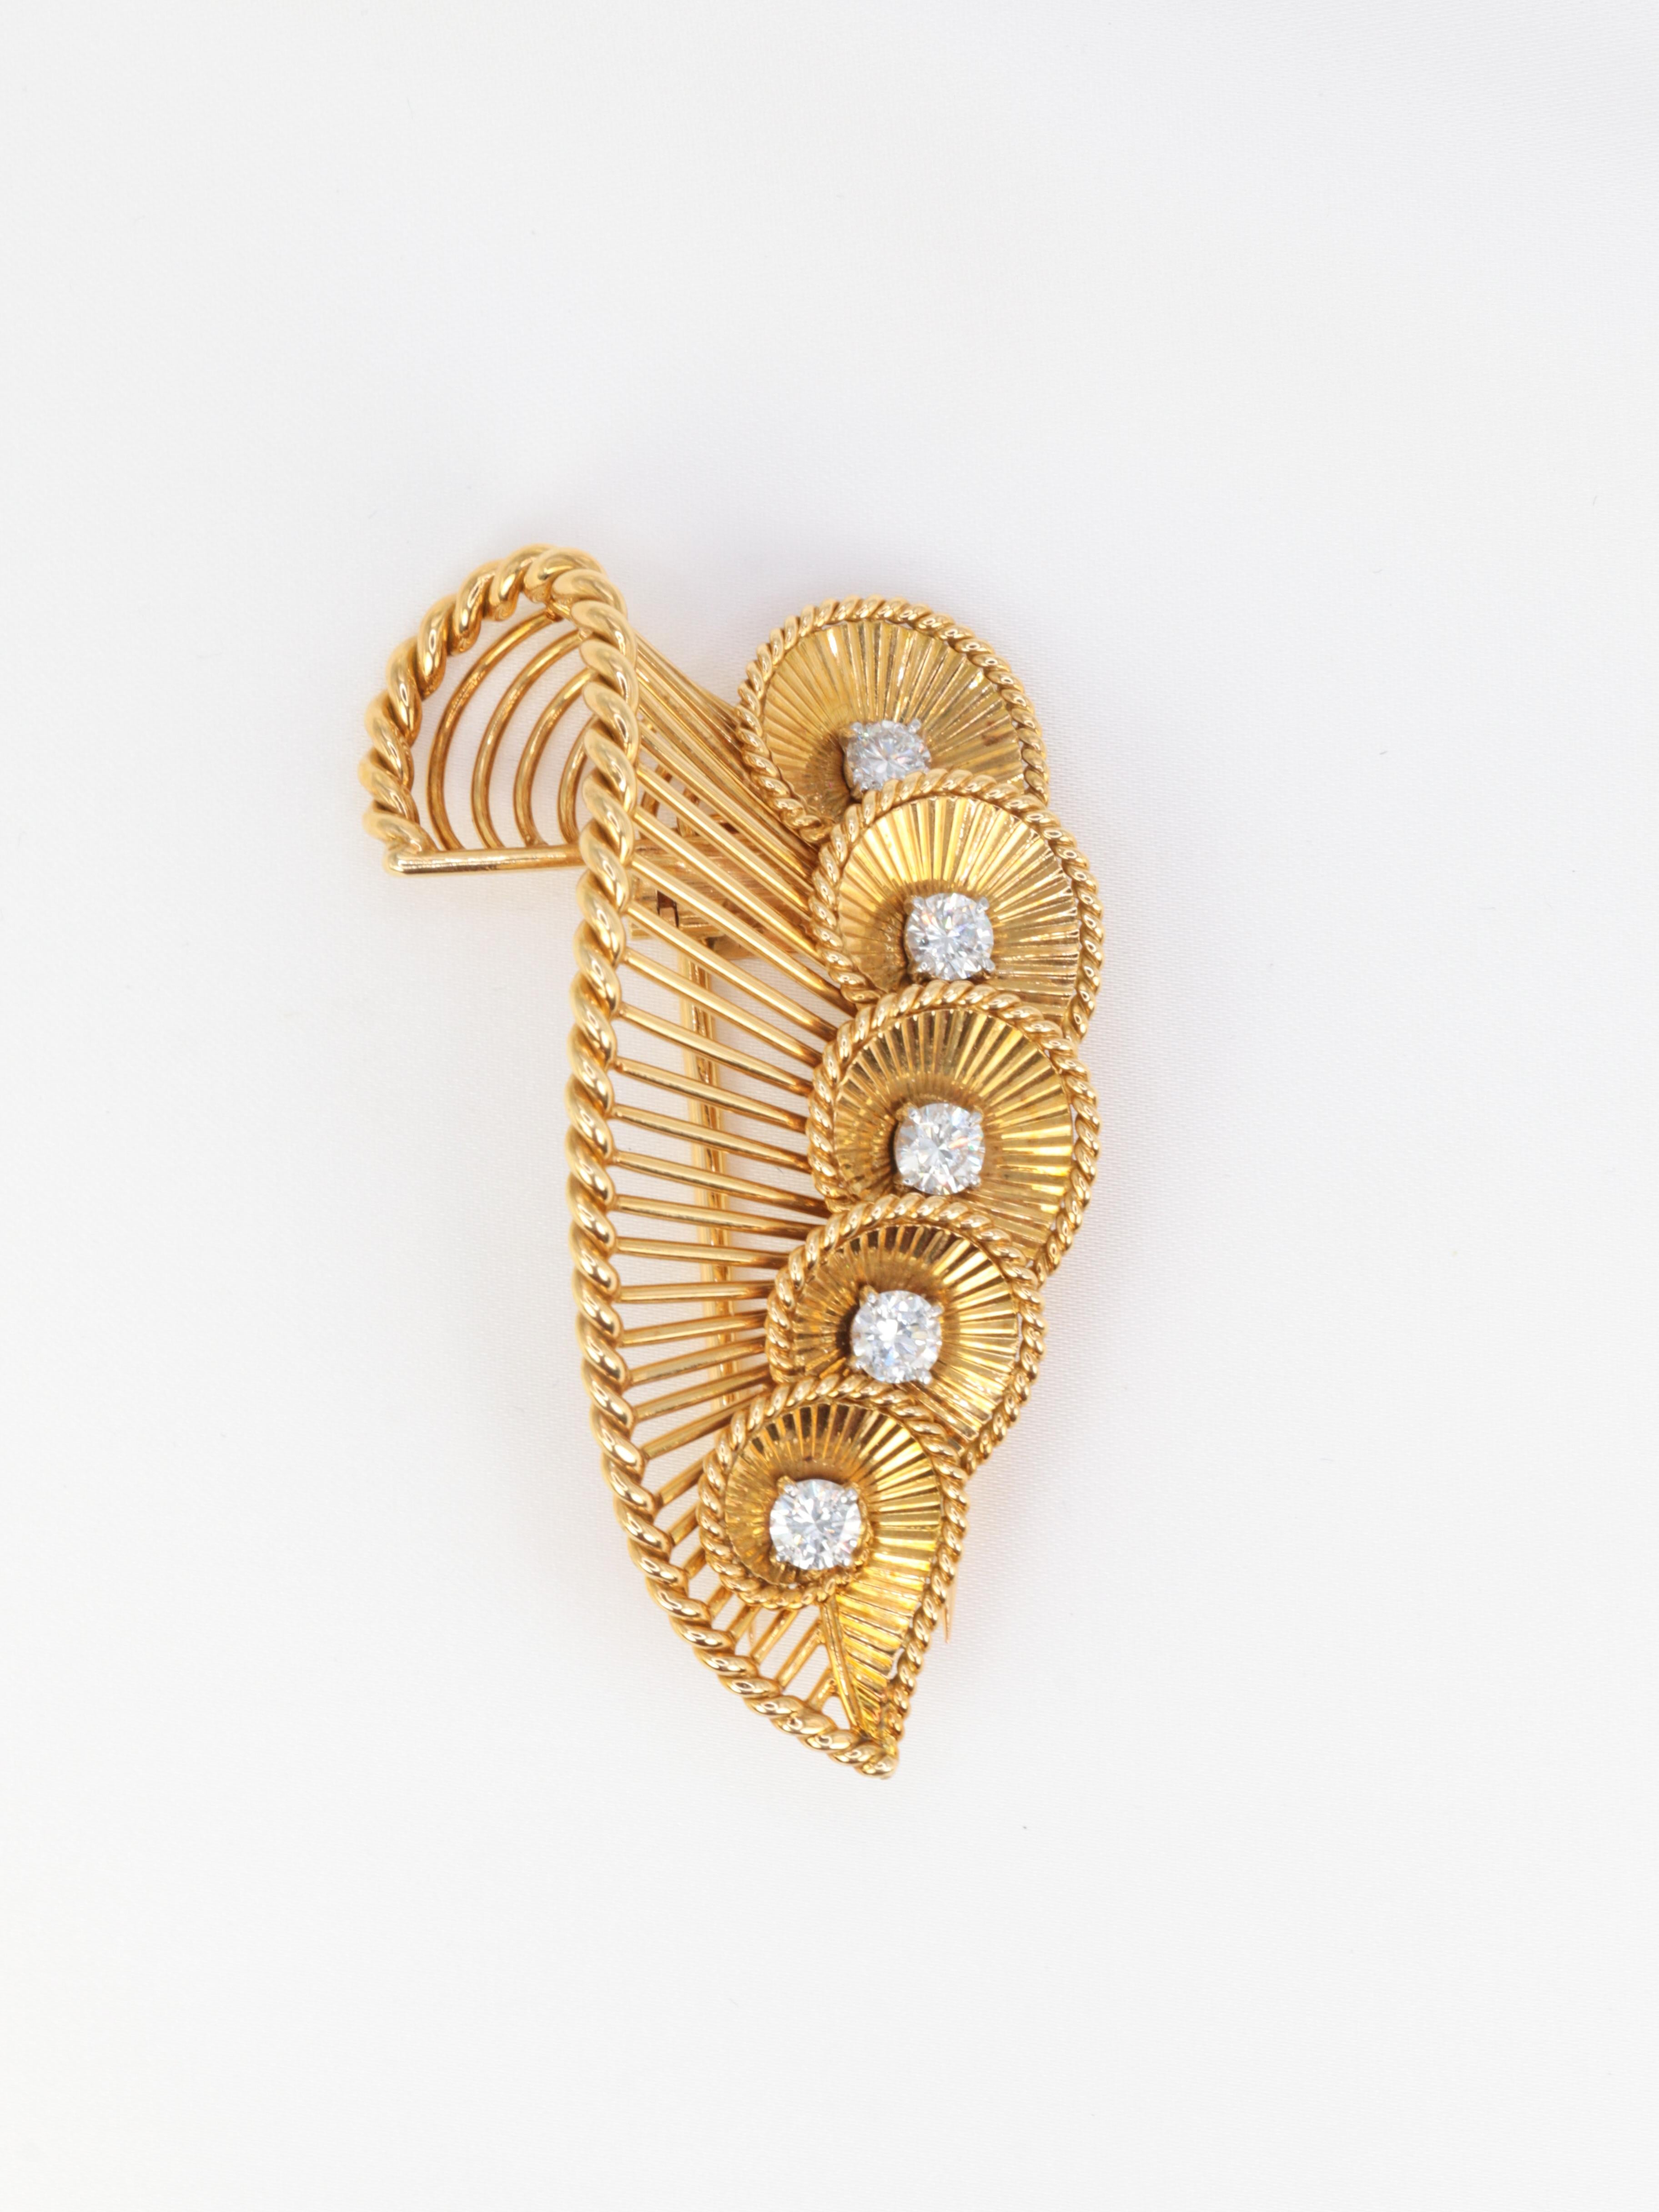 18Kt gold (750°/°°) Brooch featuring a succession of falling shells placed on a larger pattern recalling the shape of the previous ones. 
The shells are formed of rays and delimited by a twisted gold wire. The shells are set with high quality